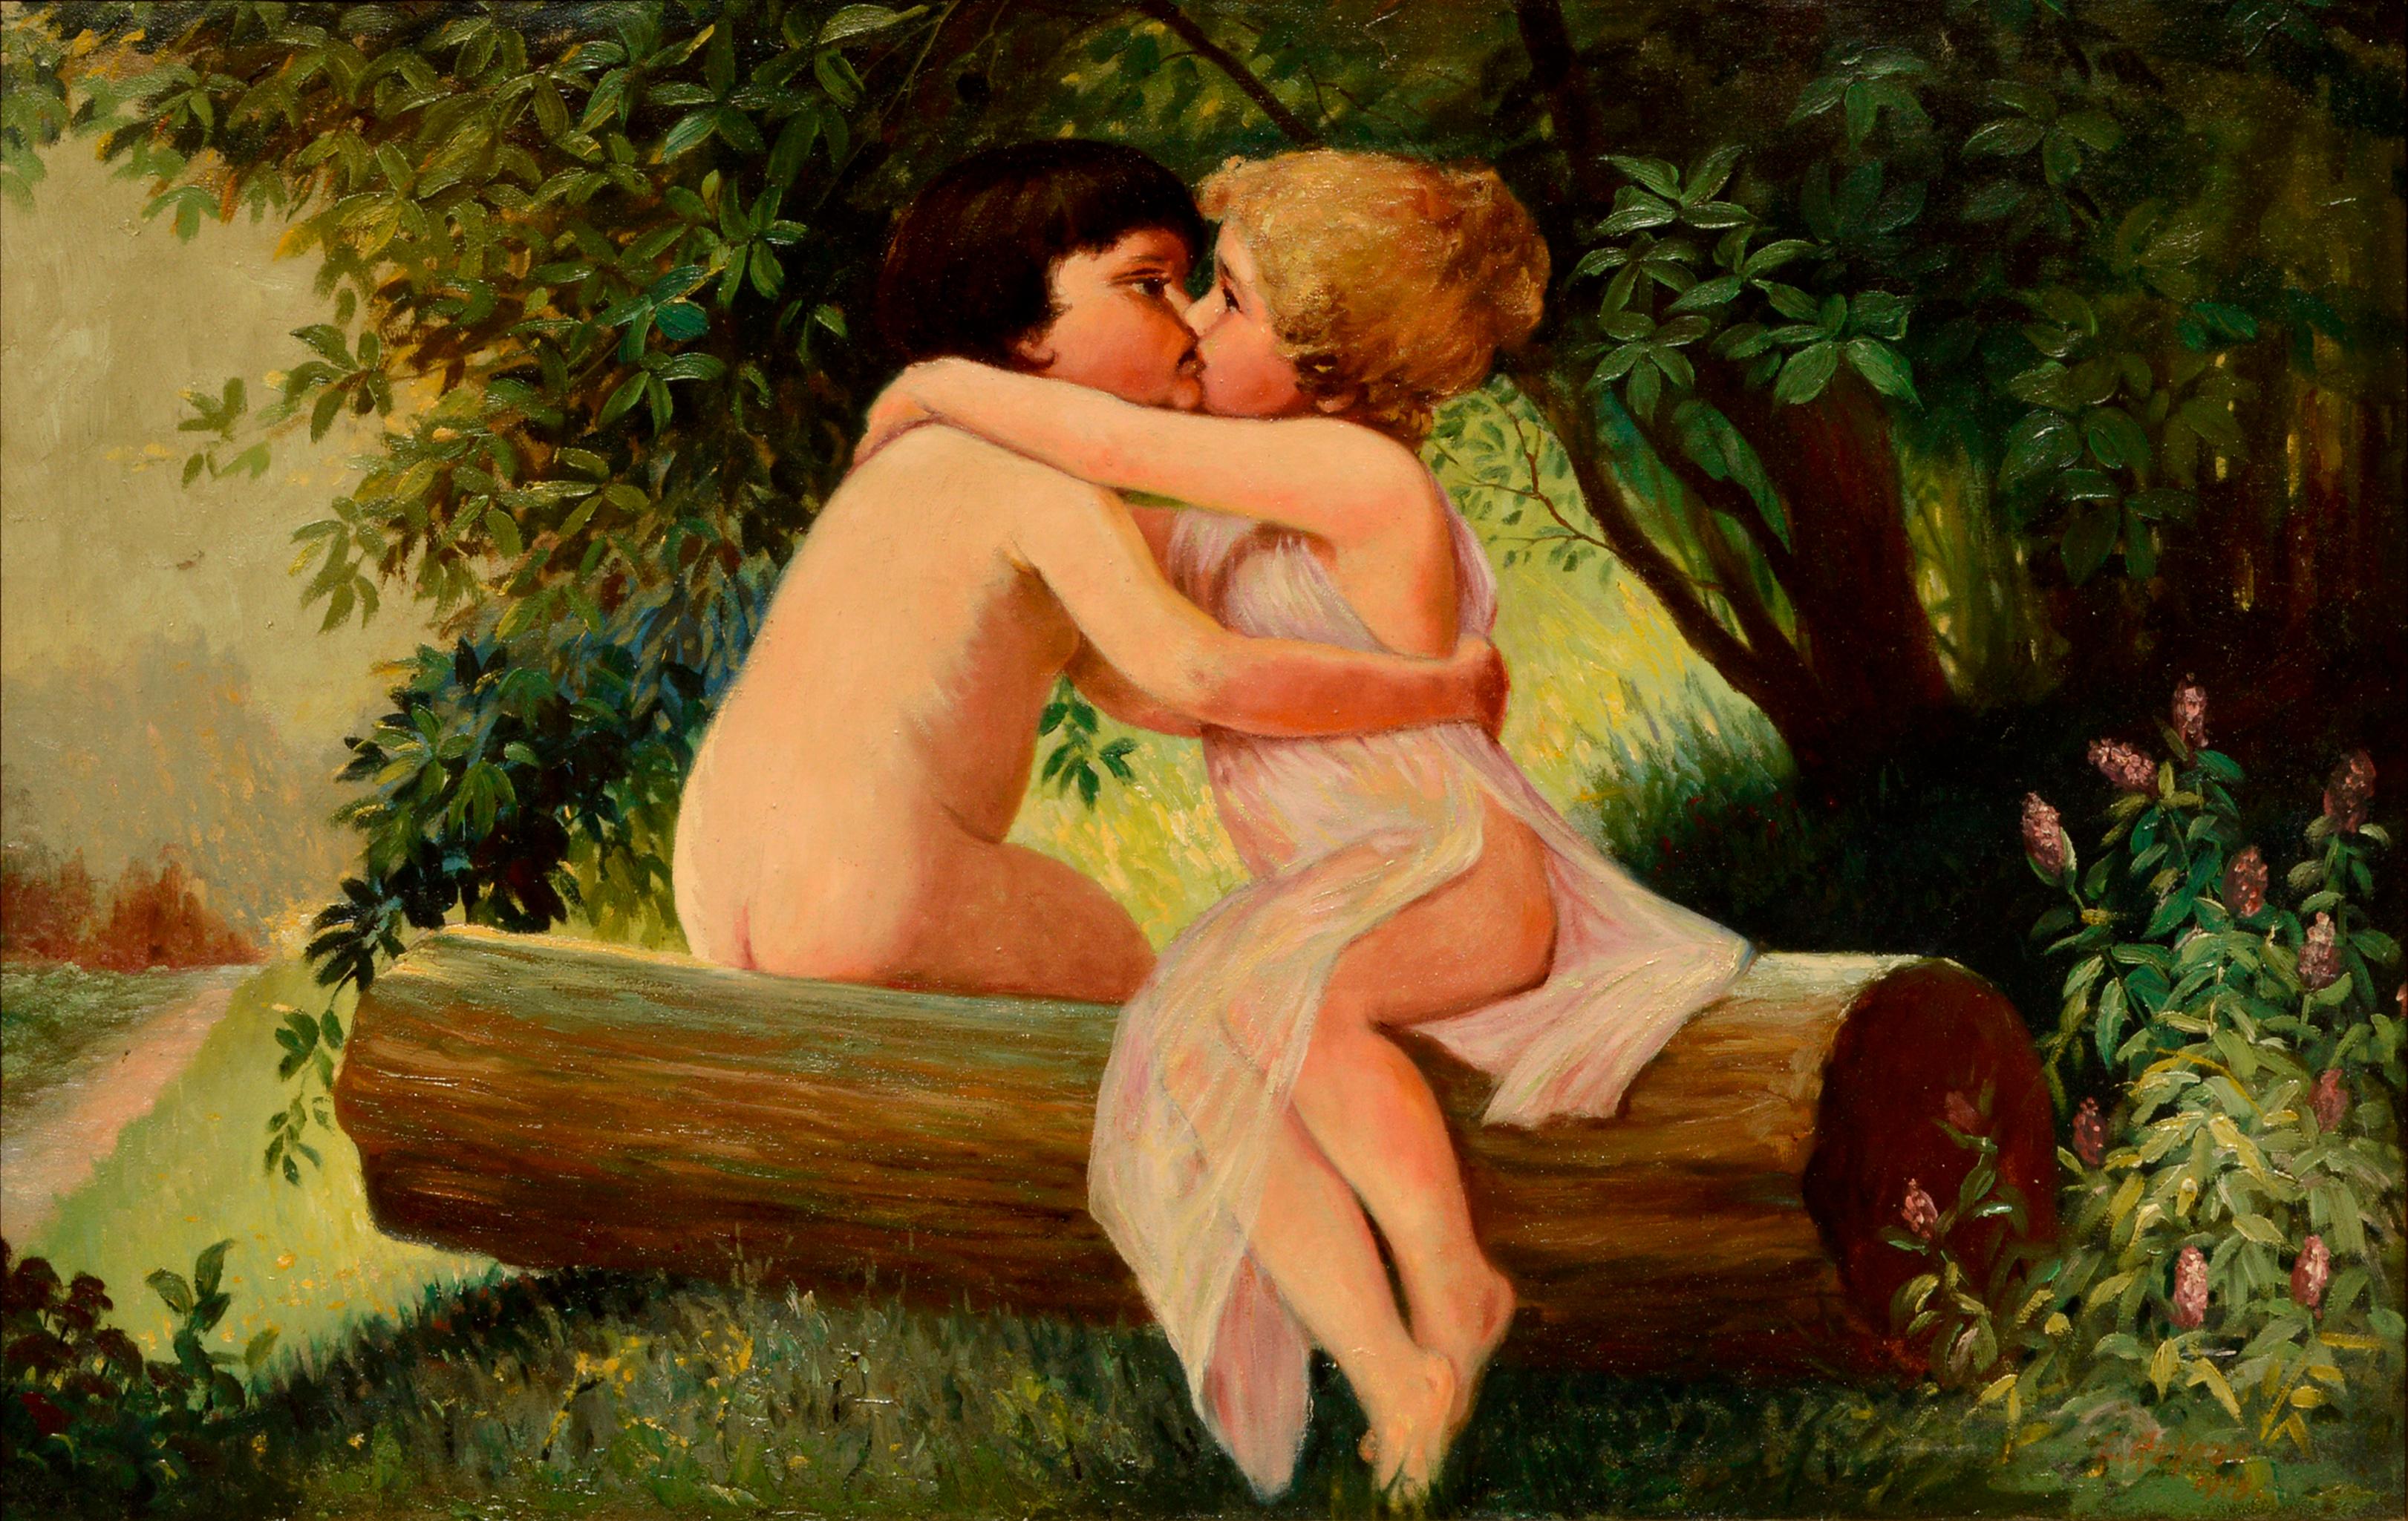 Kissing Wood Nymphs - Early 20th Century Figurative Landscape  - Painting by Carl F. Ruhnau